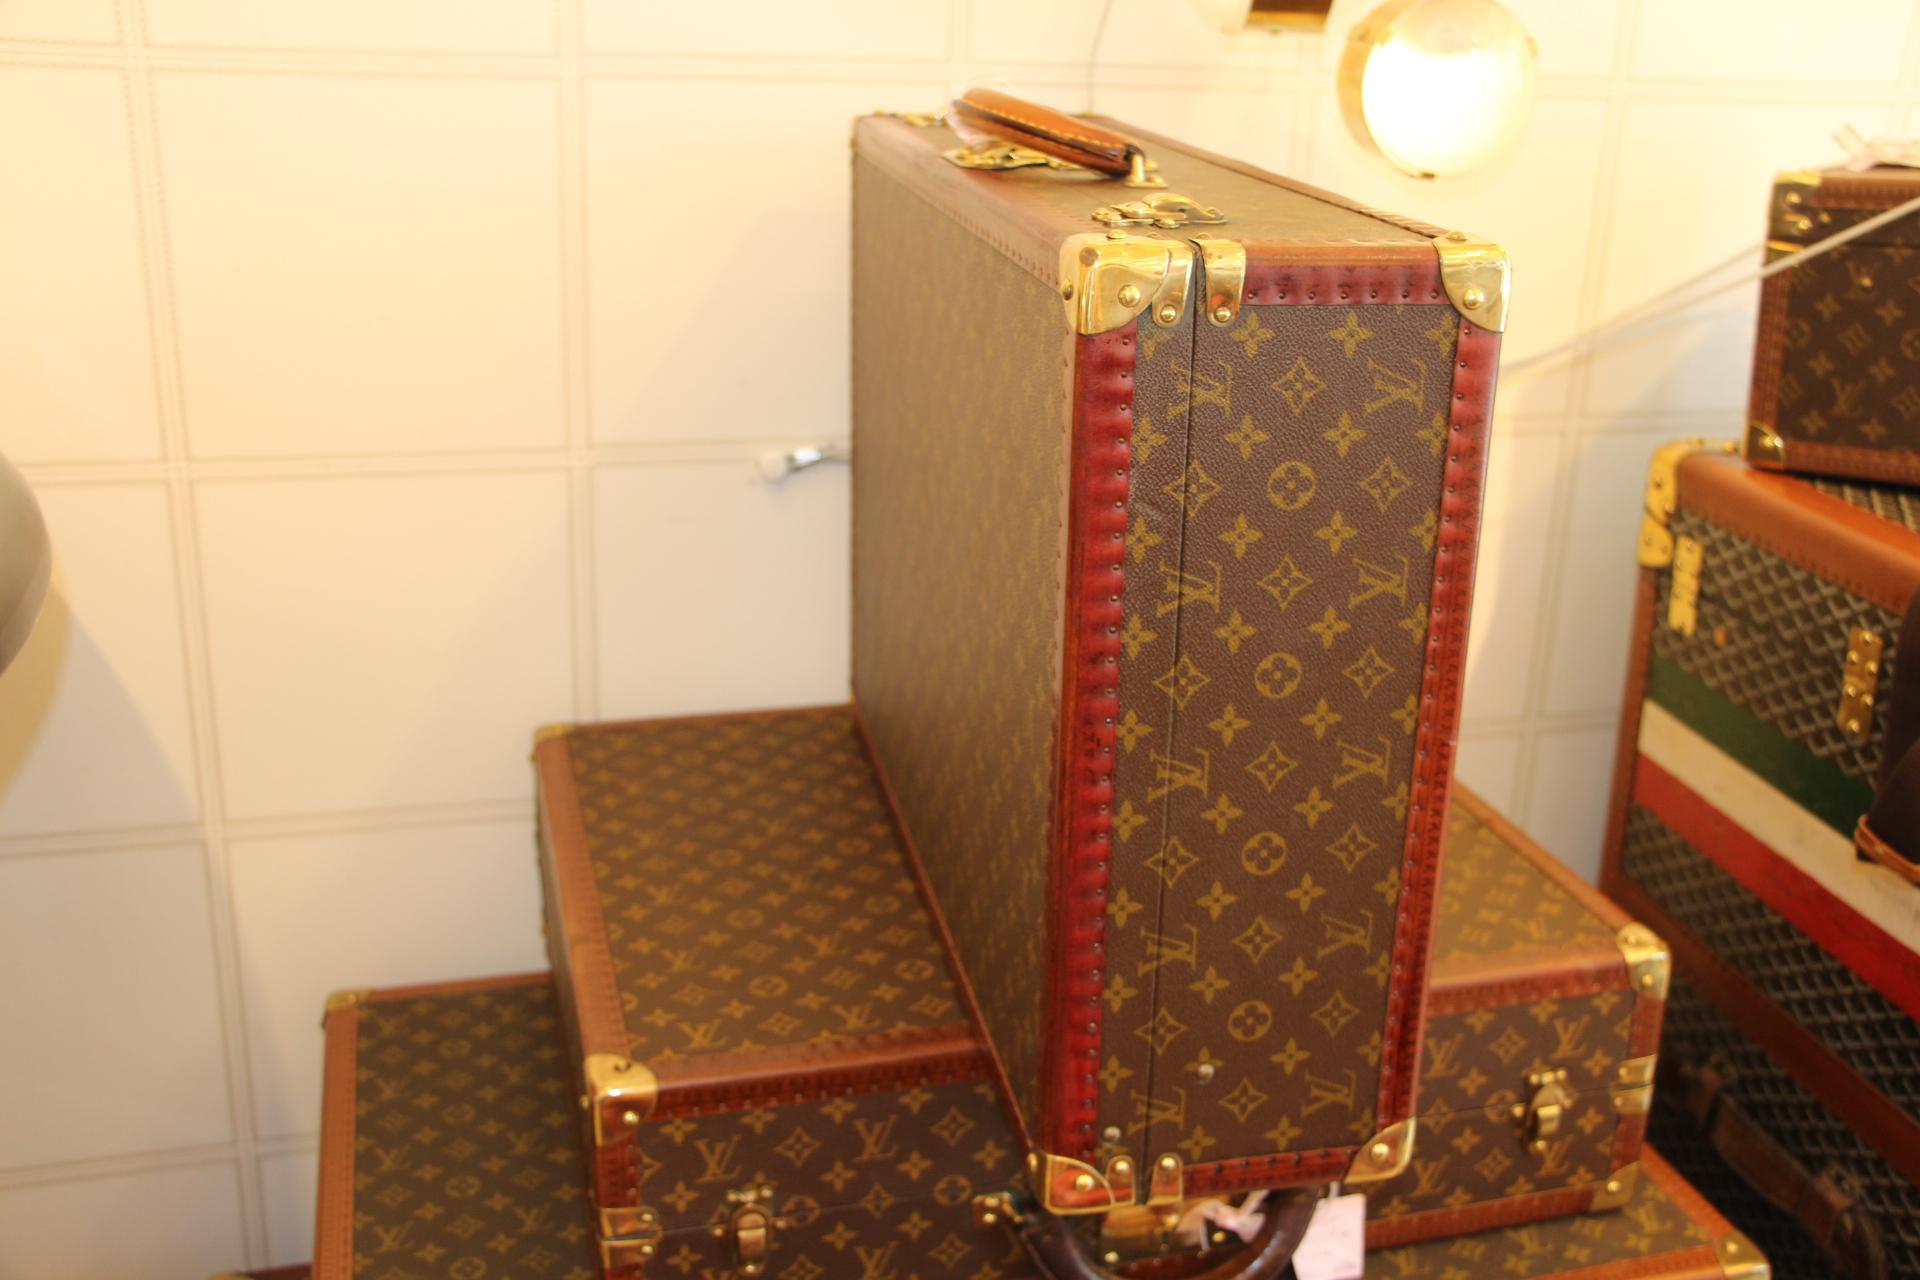 This very nice all original Louis Vuitton monogram suitcase features all brass fittings, trim marked LV and round leather handle.
Interior is in good condition with its 2 original straps .